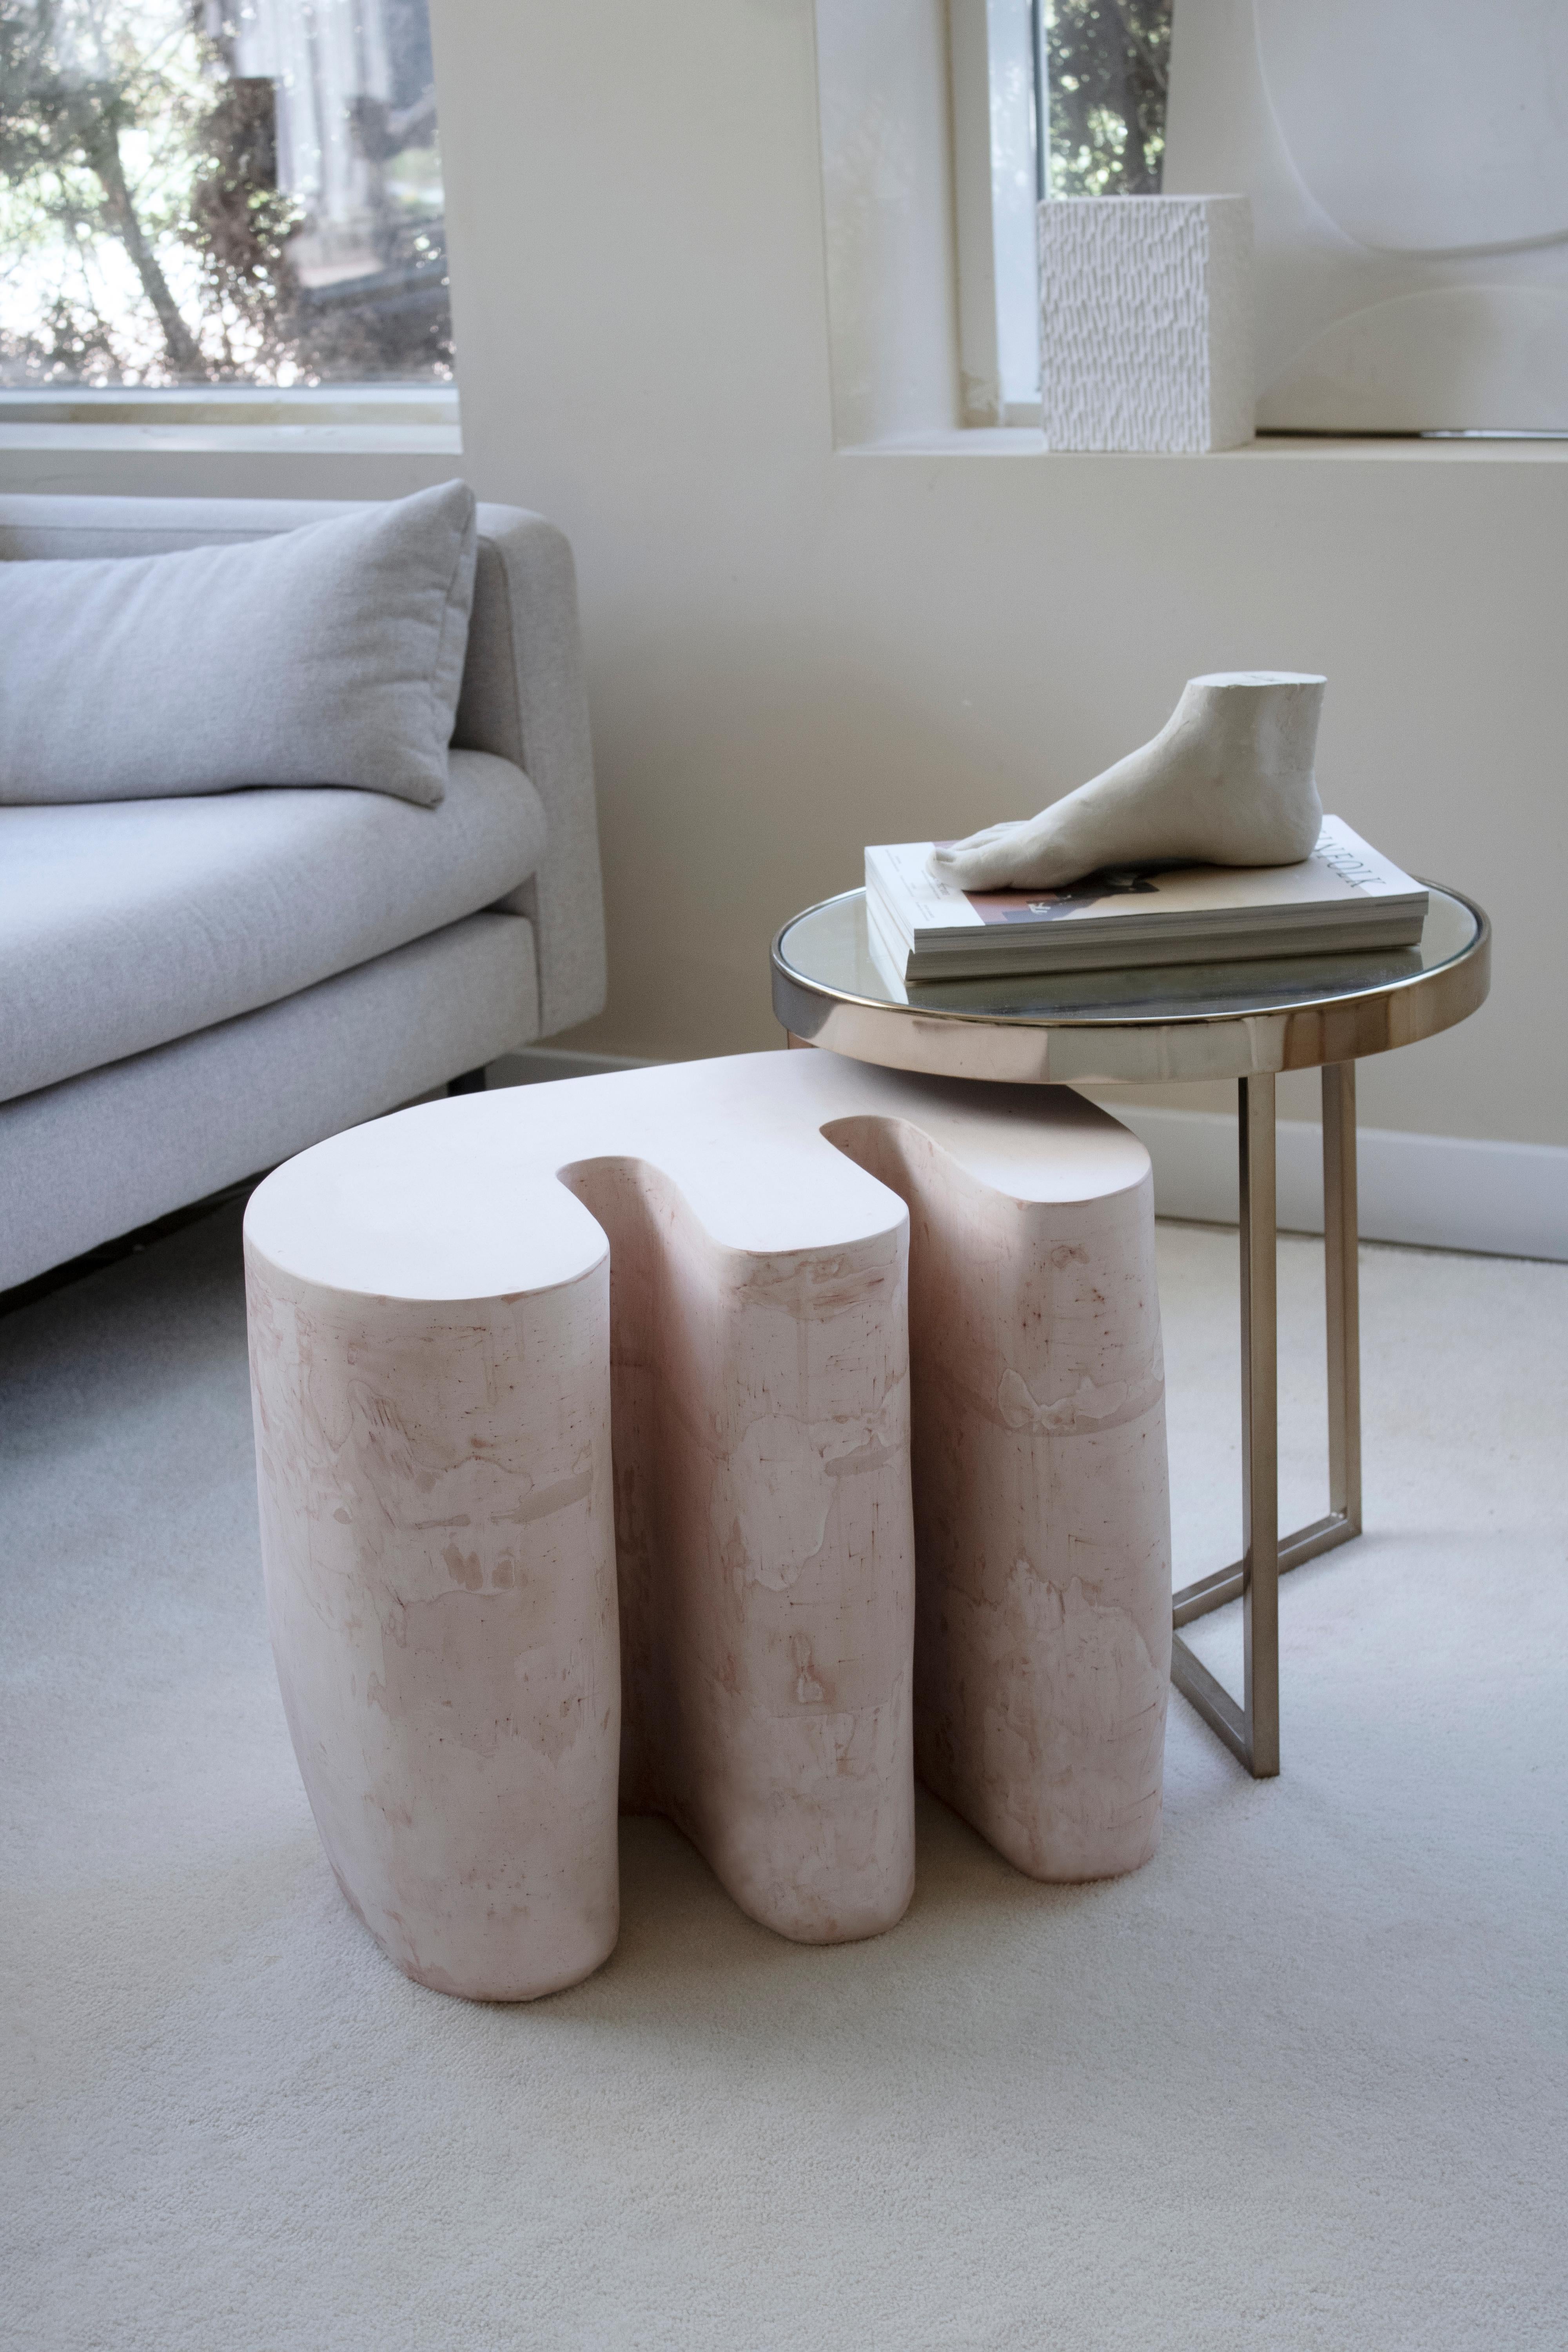 The Organic Side Table No.001 is a handmade gypsum side table part of the Forms collection. Its cast gypsum construction, hand-carved detailing, and customizable color options ensure that each piece is unique, creating a special allure that